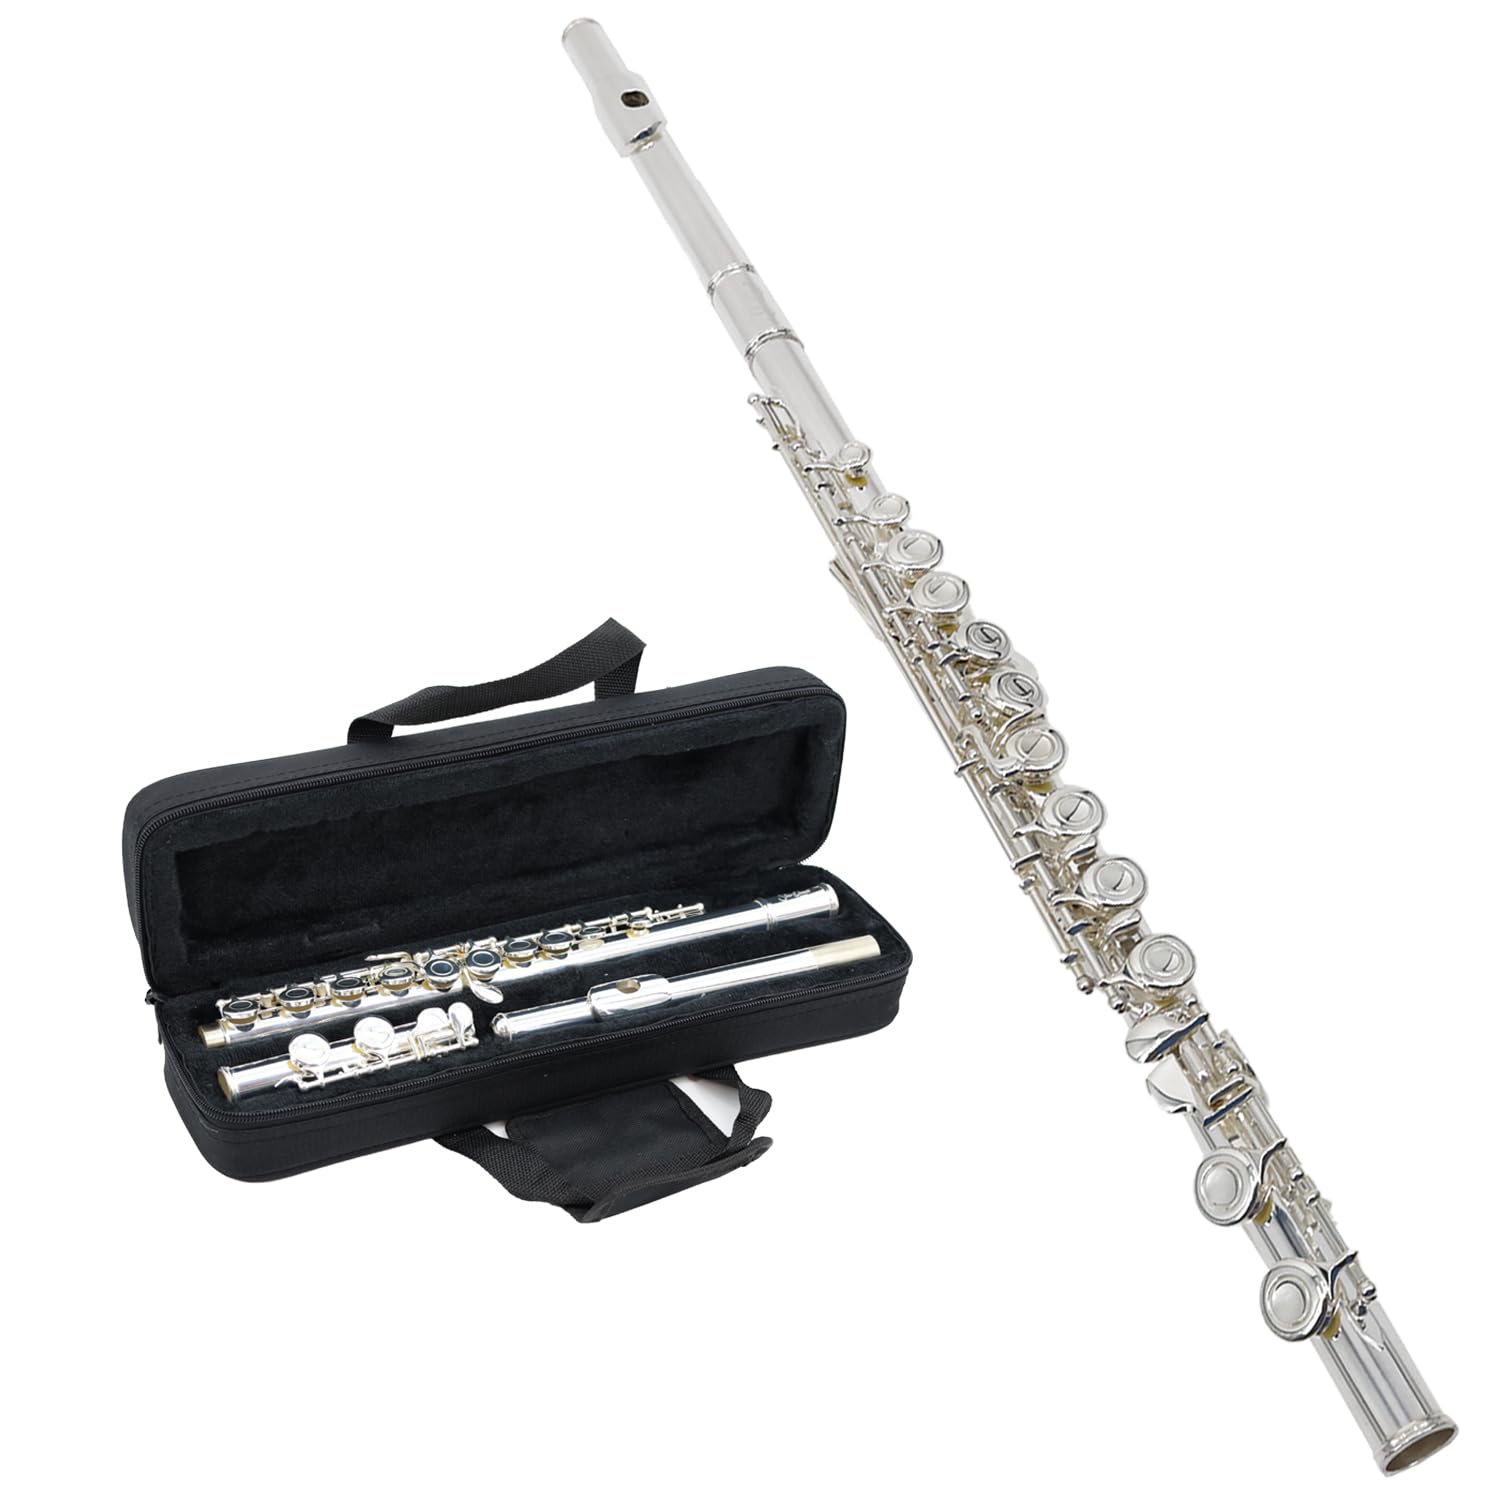 StarQuest SQ-FL250 Silver-Plated Closed-Hole C Flute - Premium Quality Instrument for Beginners and Experienced Musicians. Includes hard Protective Case